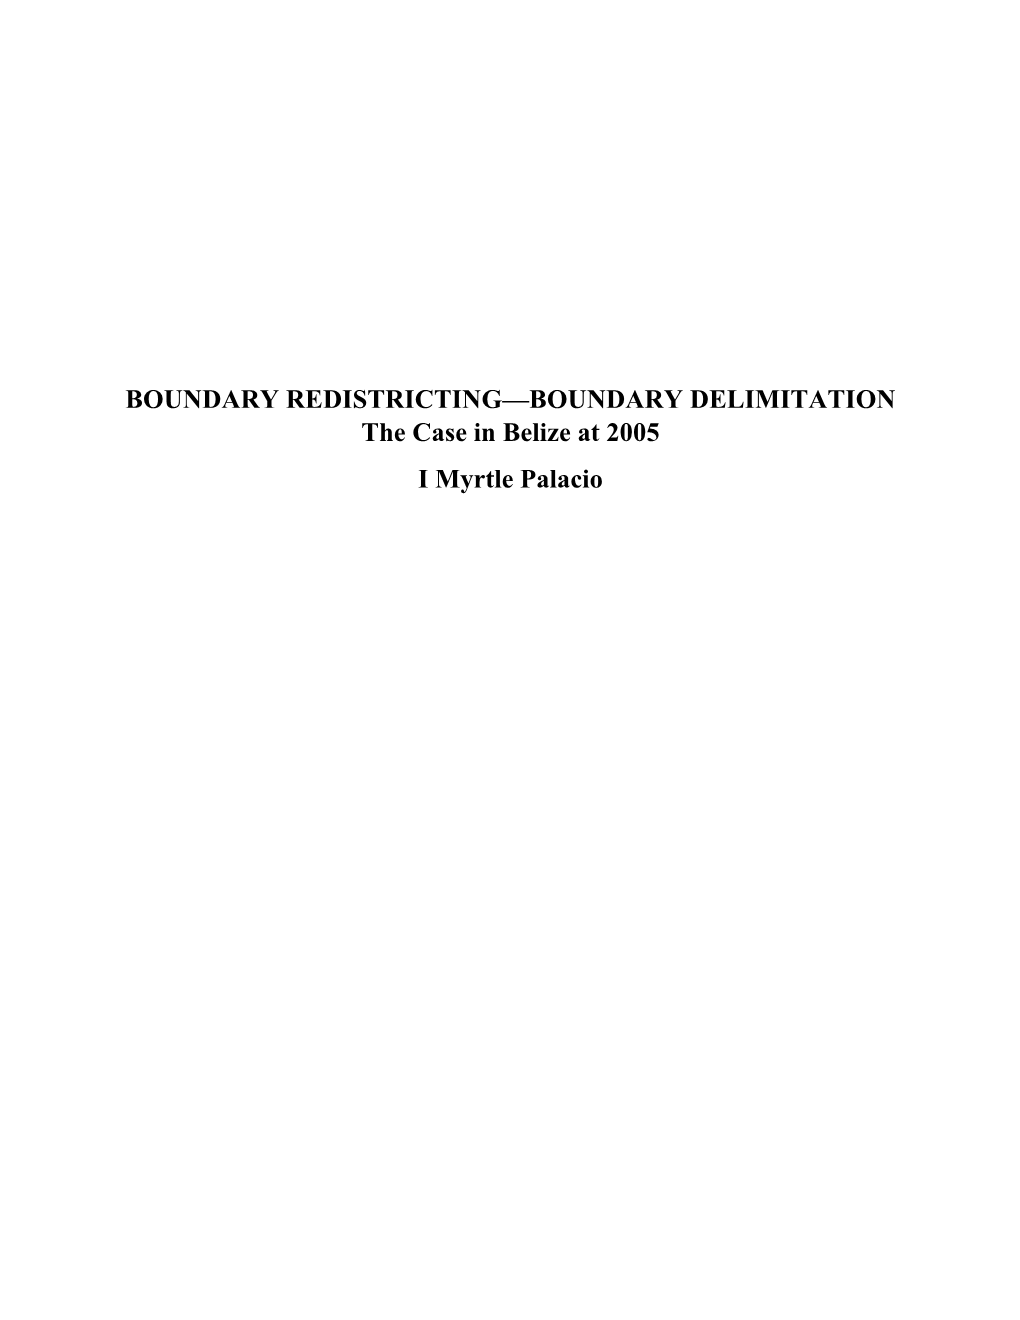 BOUNDARY REDISTRICTING—BOUNDARY DELIMITATION the Case in Belize at 2005 I Myrtle Palacio the WHAT and HOW of BOUNDARY REDISTRICTING 2004